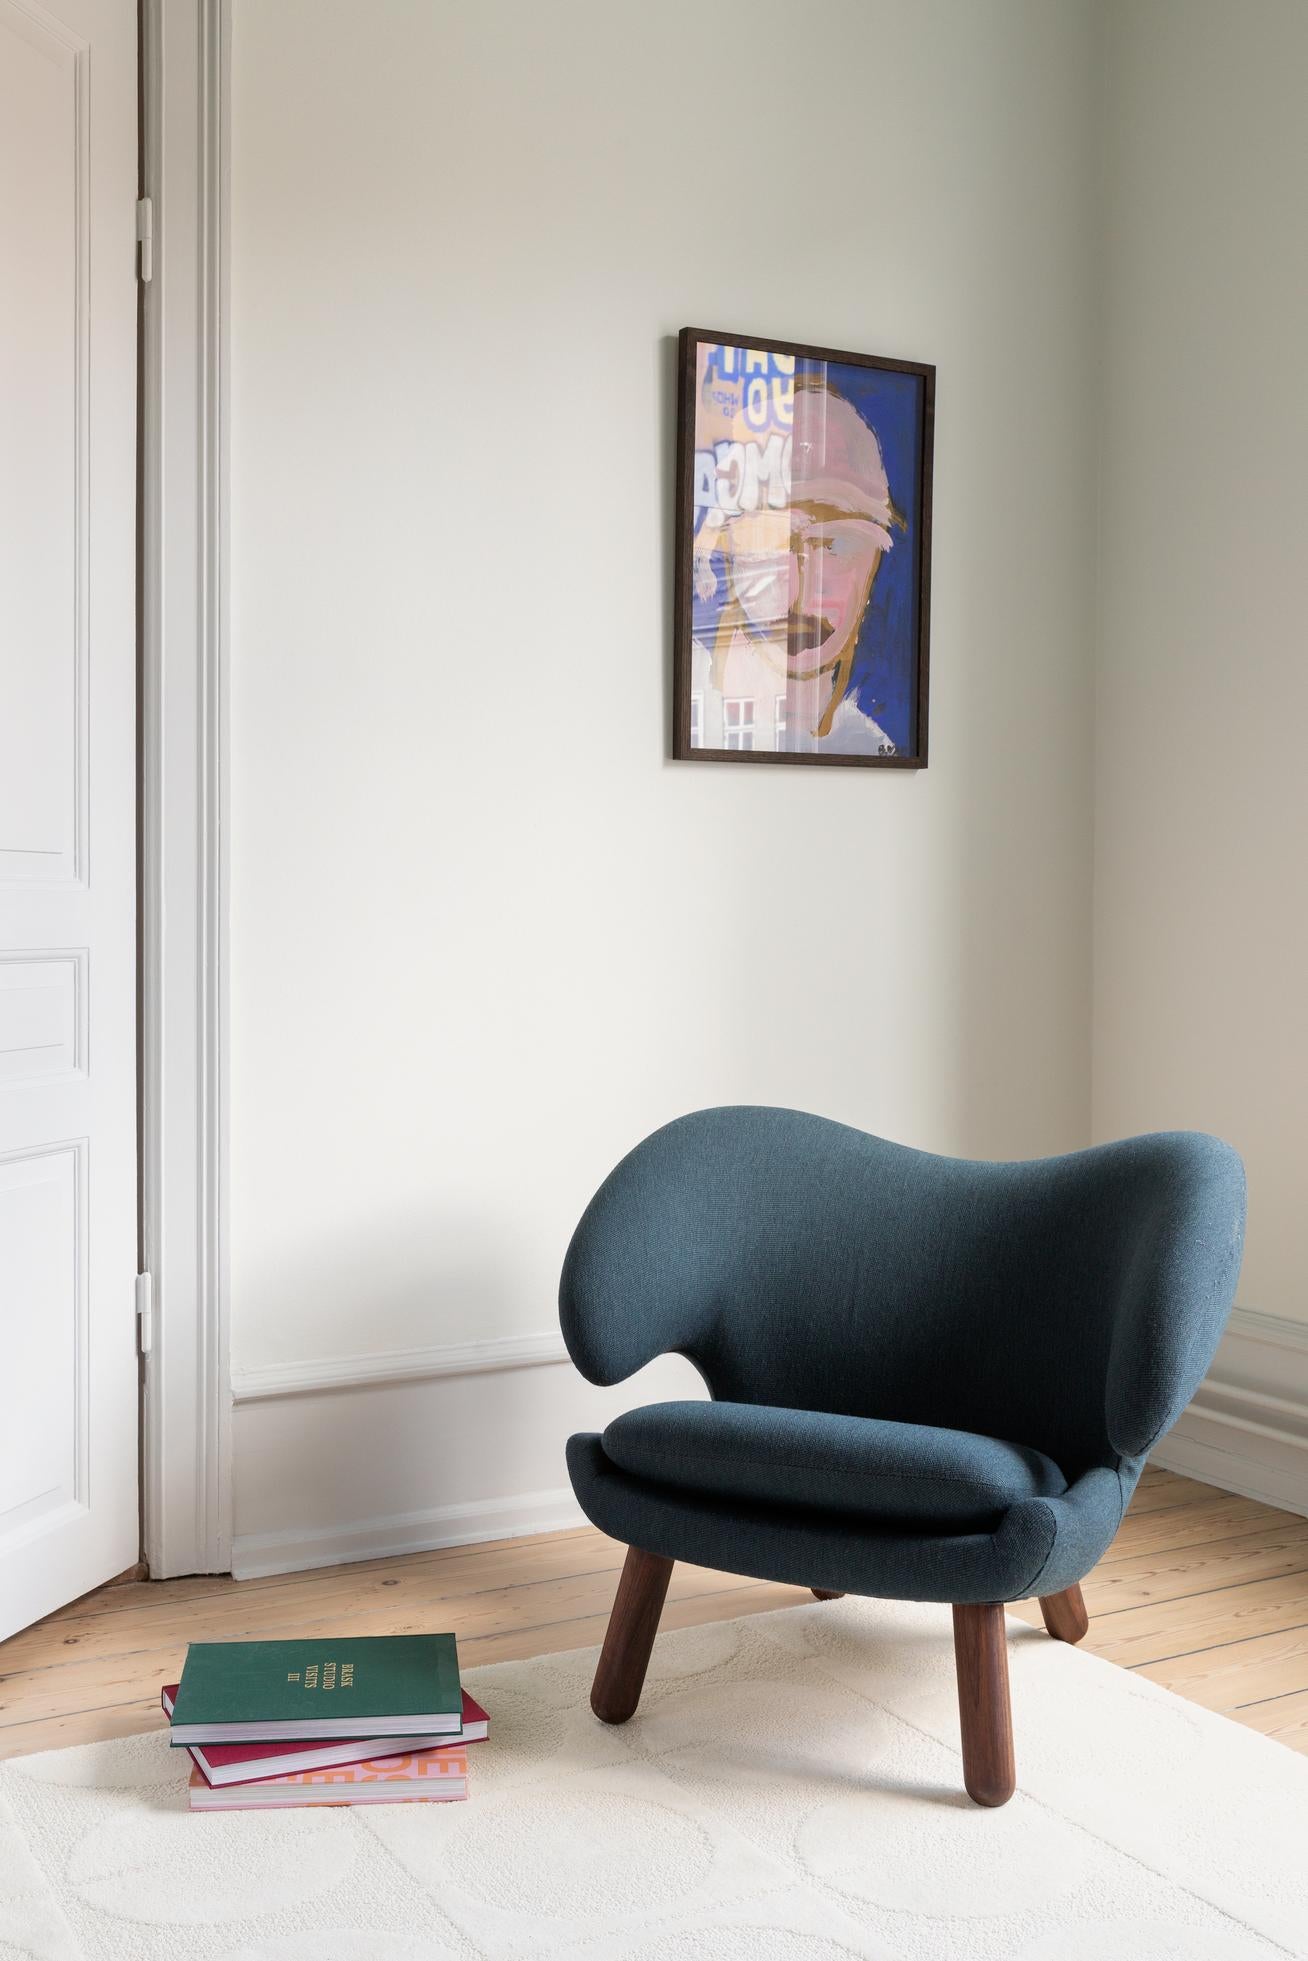 Finn Juhl Pelican Chair Upholstered in Wood and Fabric 10